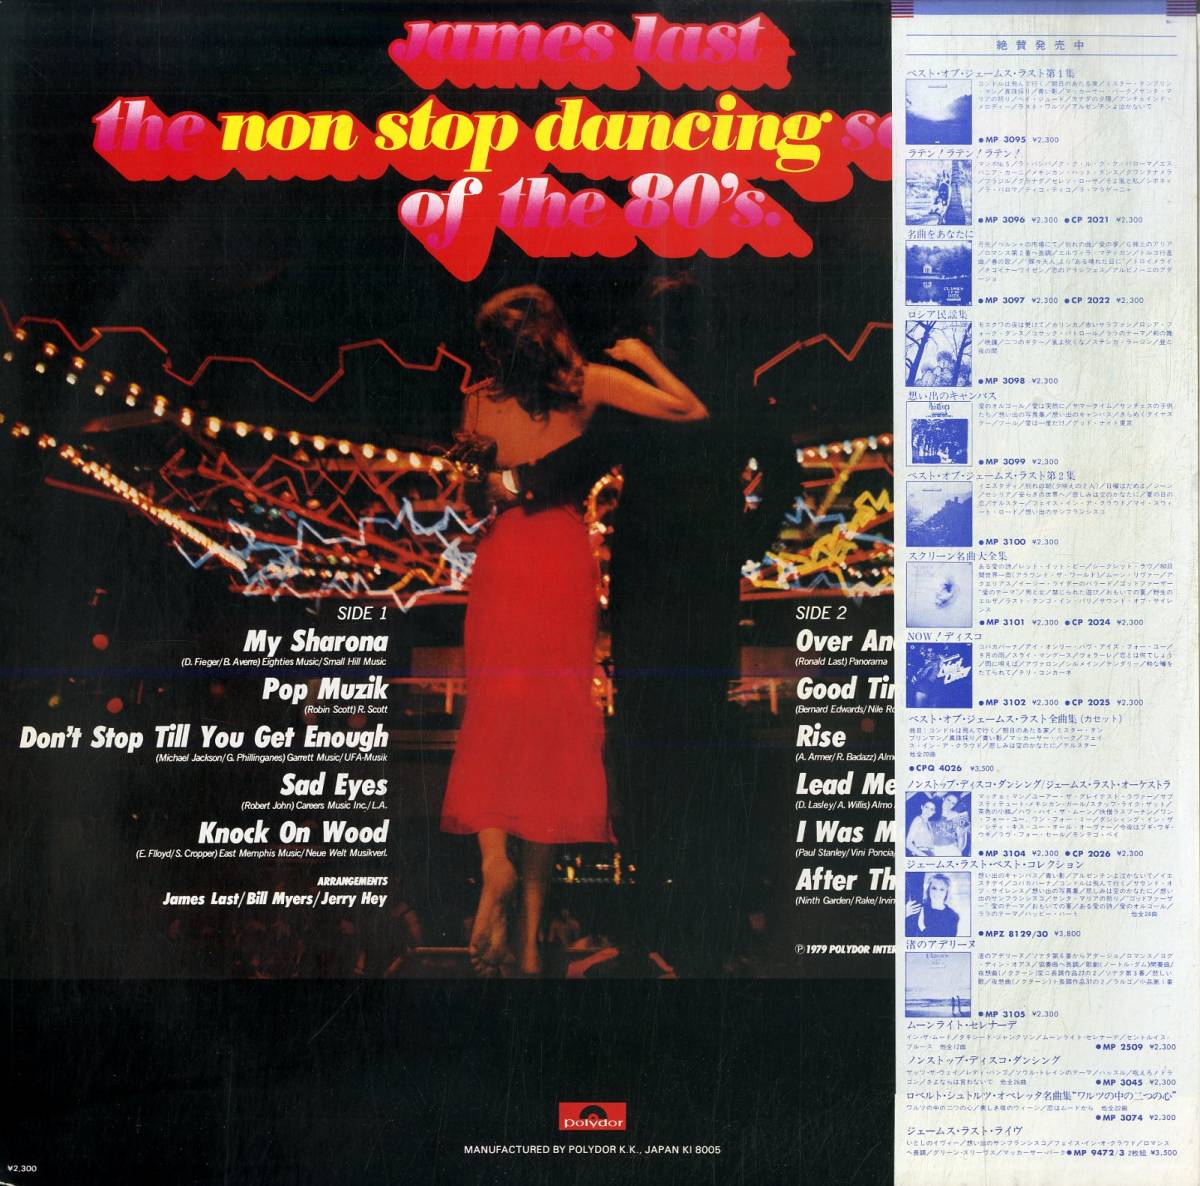 A00580152/LP/ジェームス・ラスト (JAMES LAST)「The Non Stop Dancing Sound Of The 80s (1979年・MP-2596・イージーリスニング・シュラ_画像2